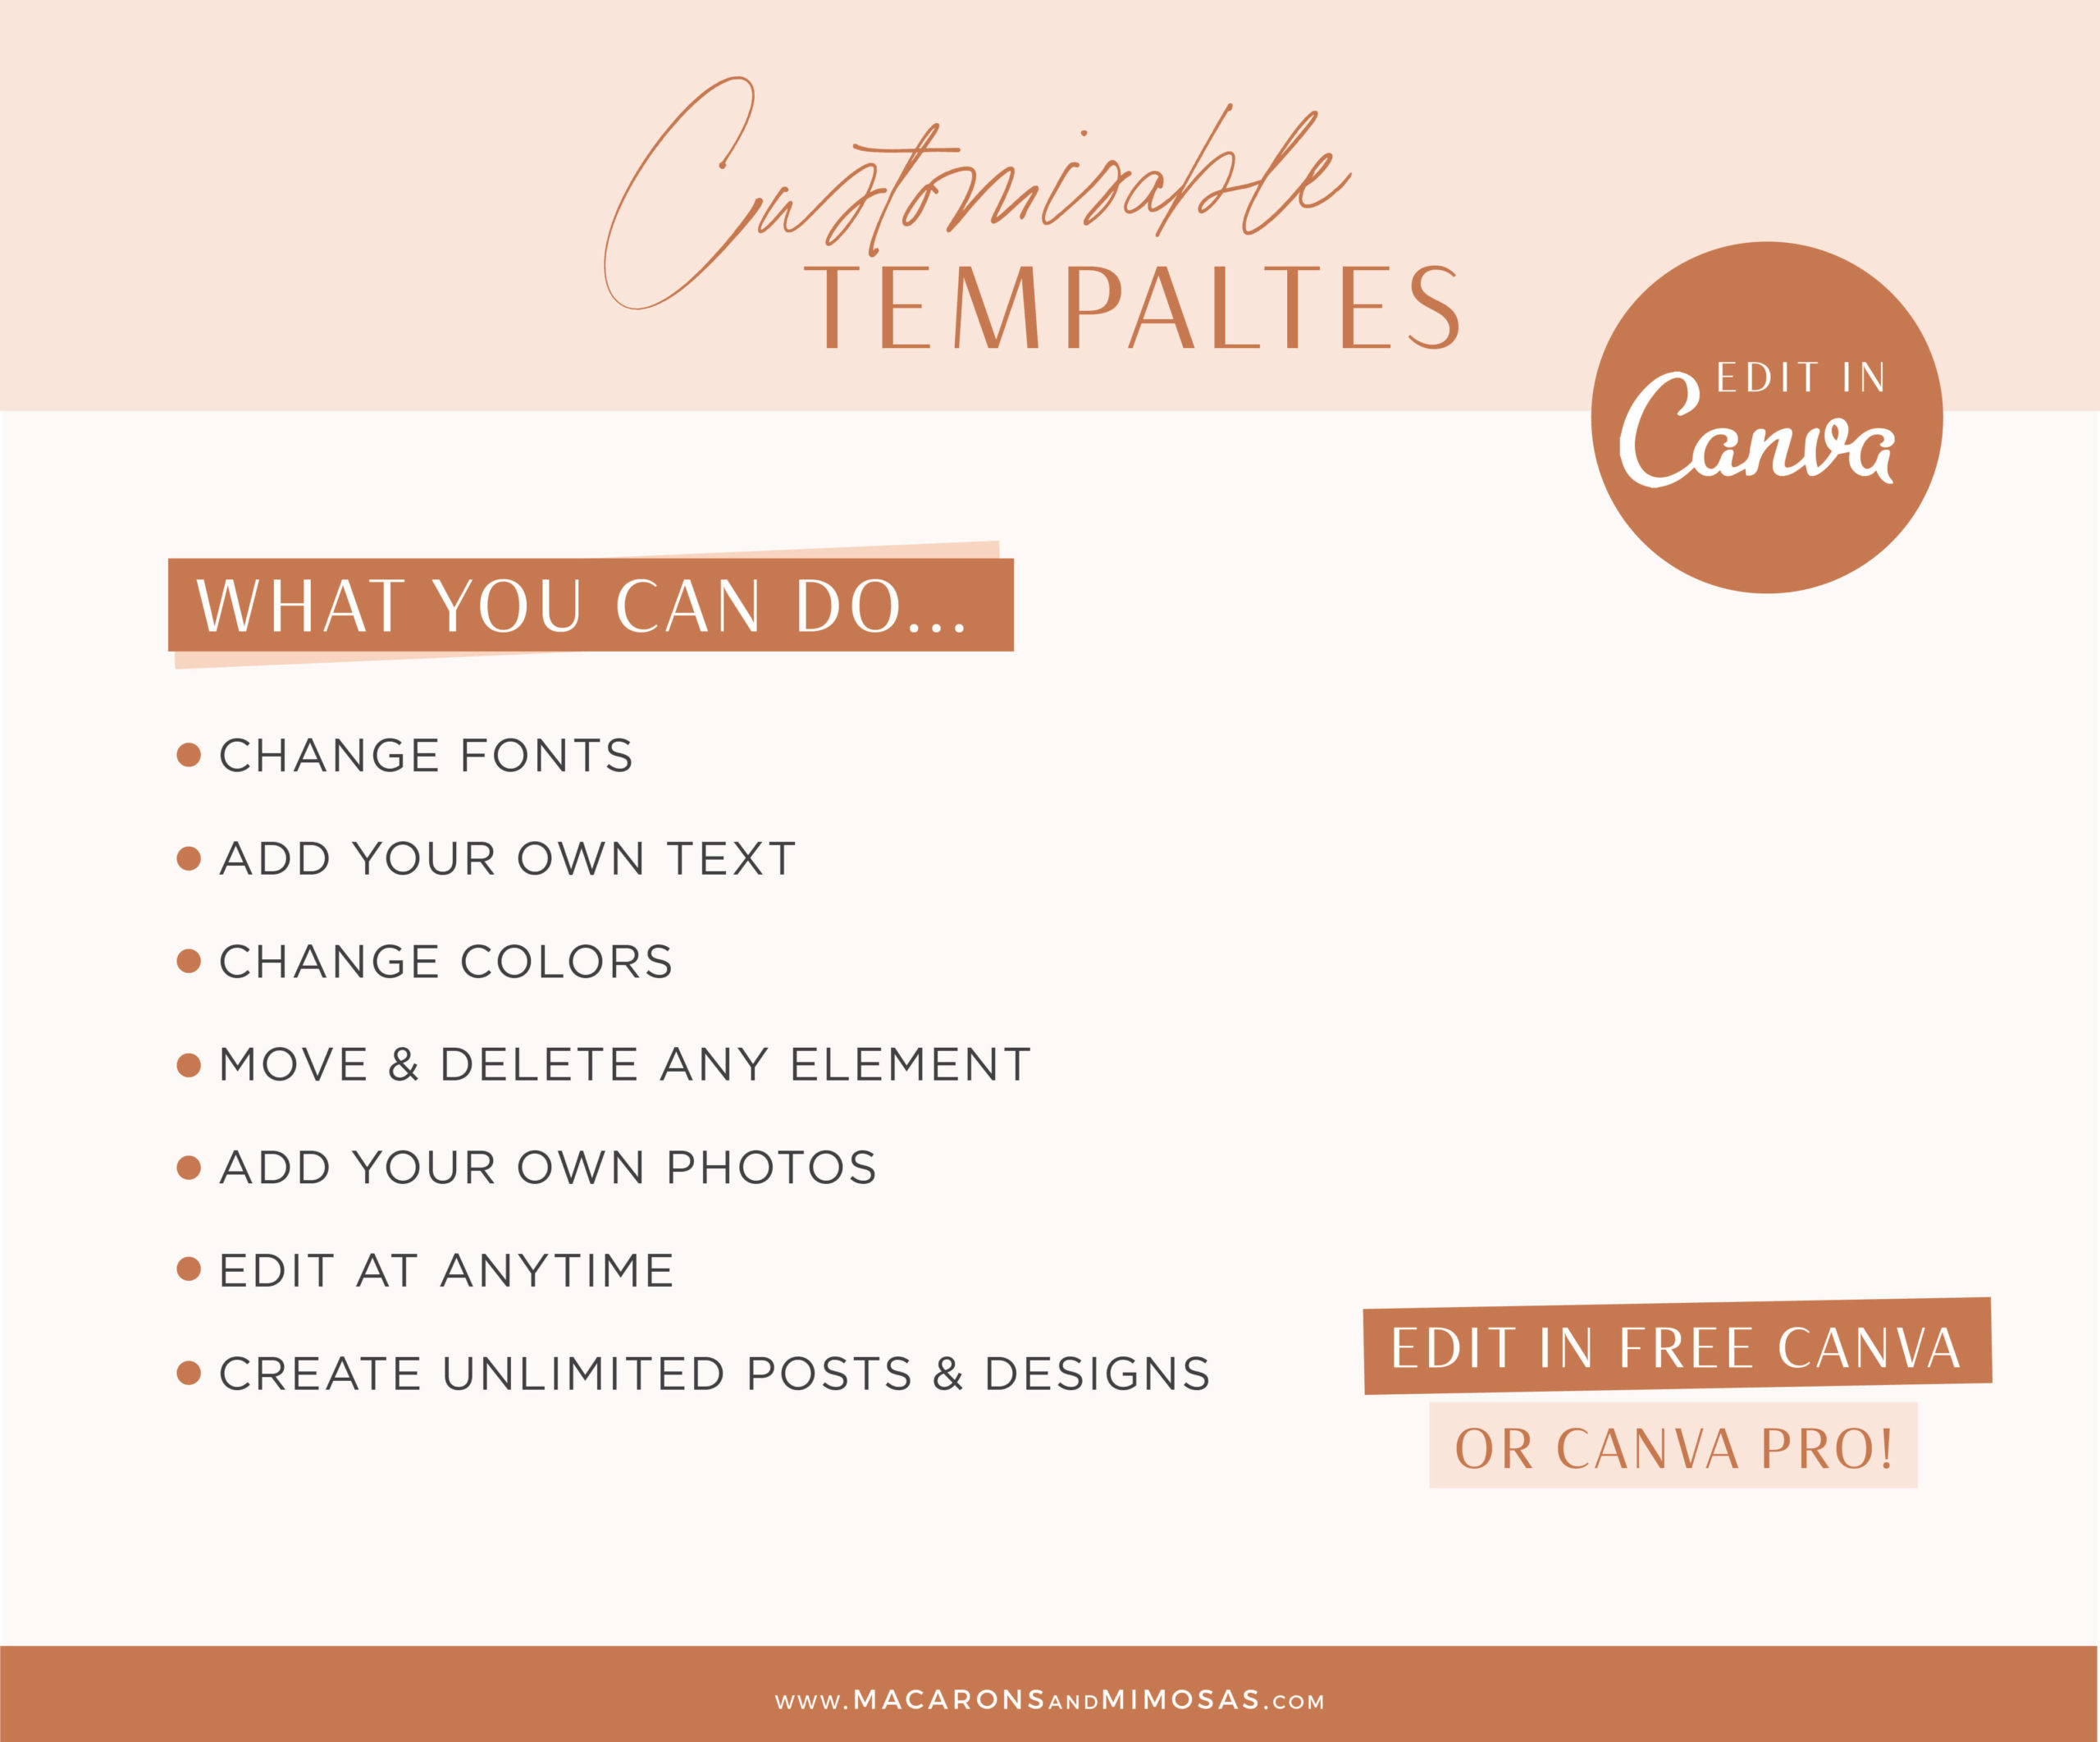 Neutral Boho Instagram Post Templates Canva, Bright Quotes for Instagram, Creative Instagram Templates, Colorful Canva Designs, Small Business Brand